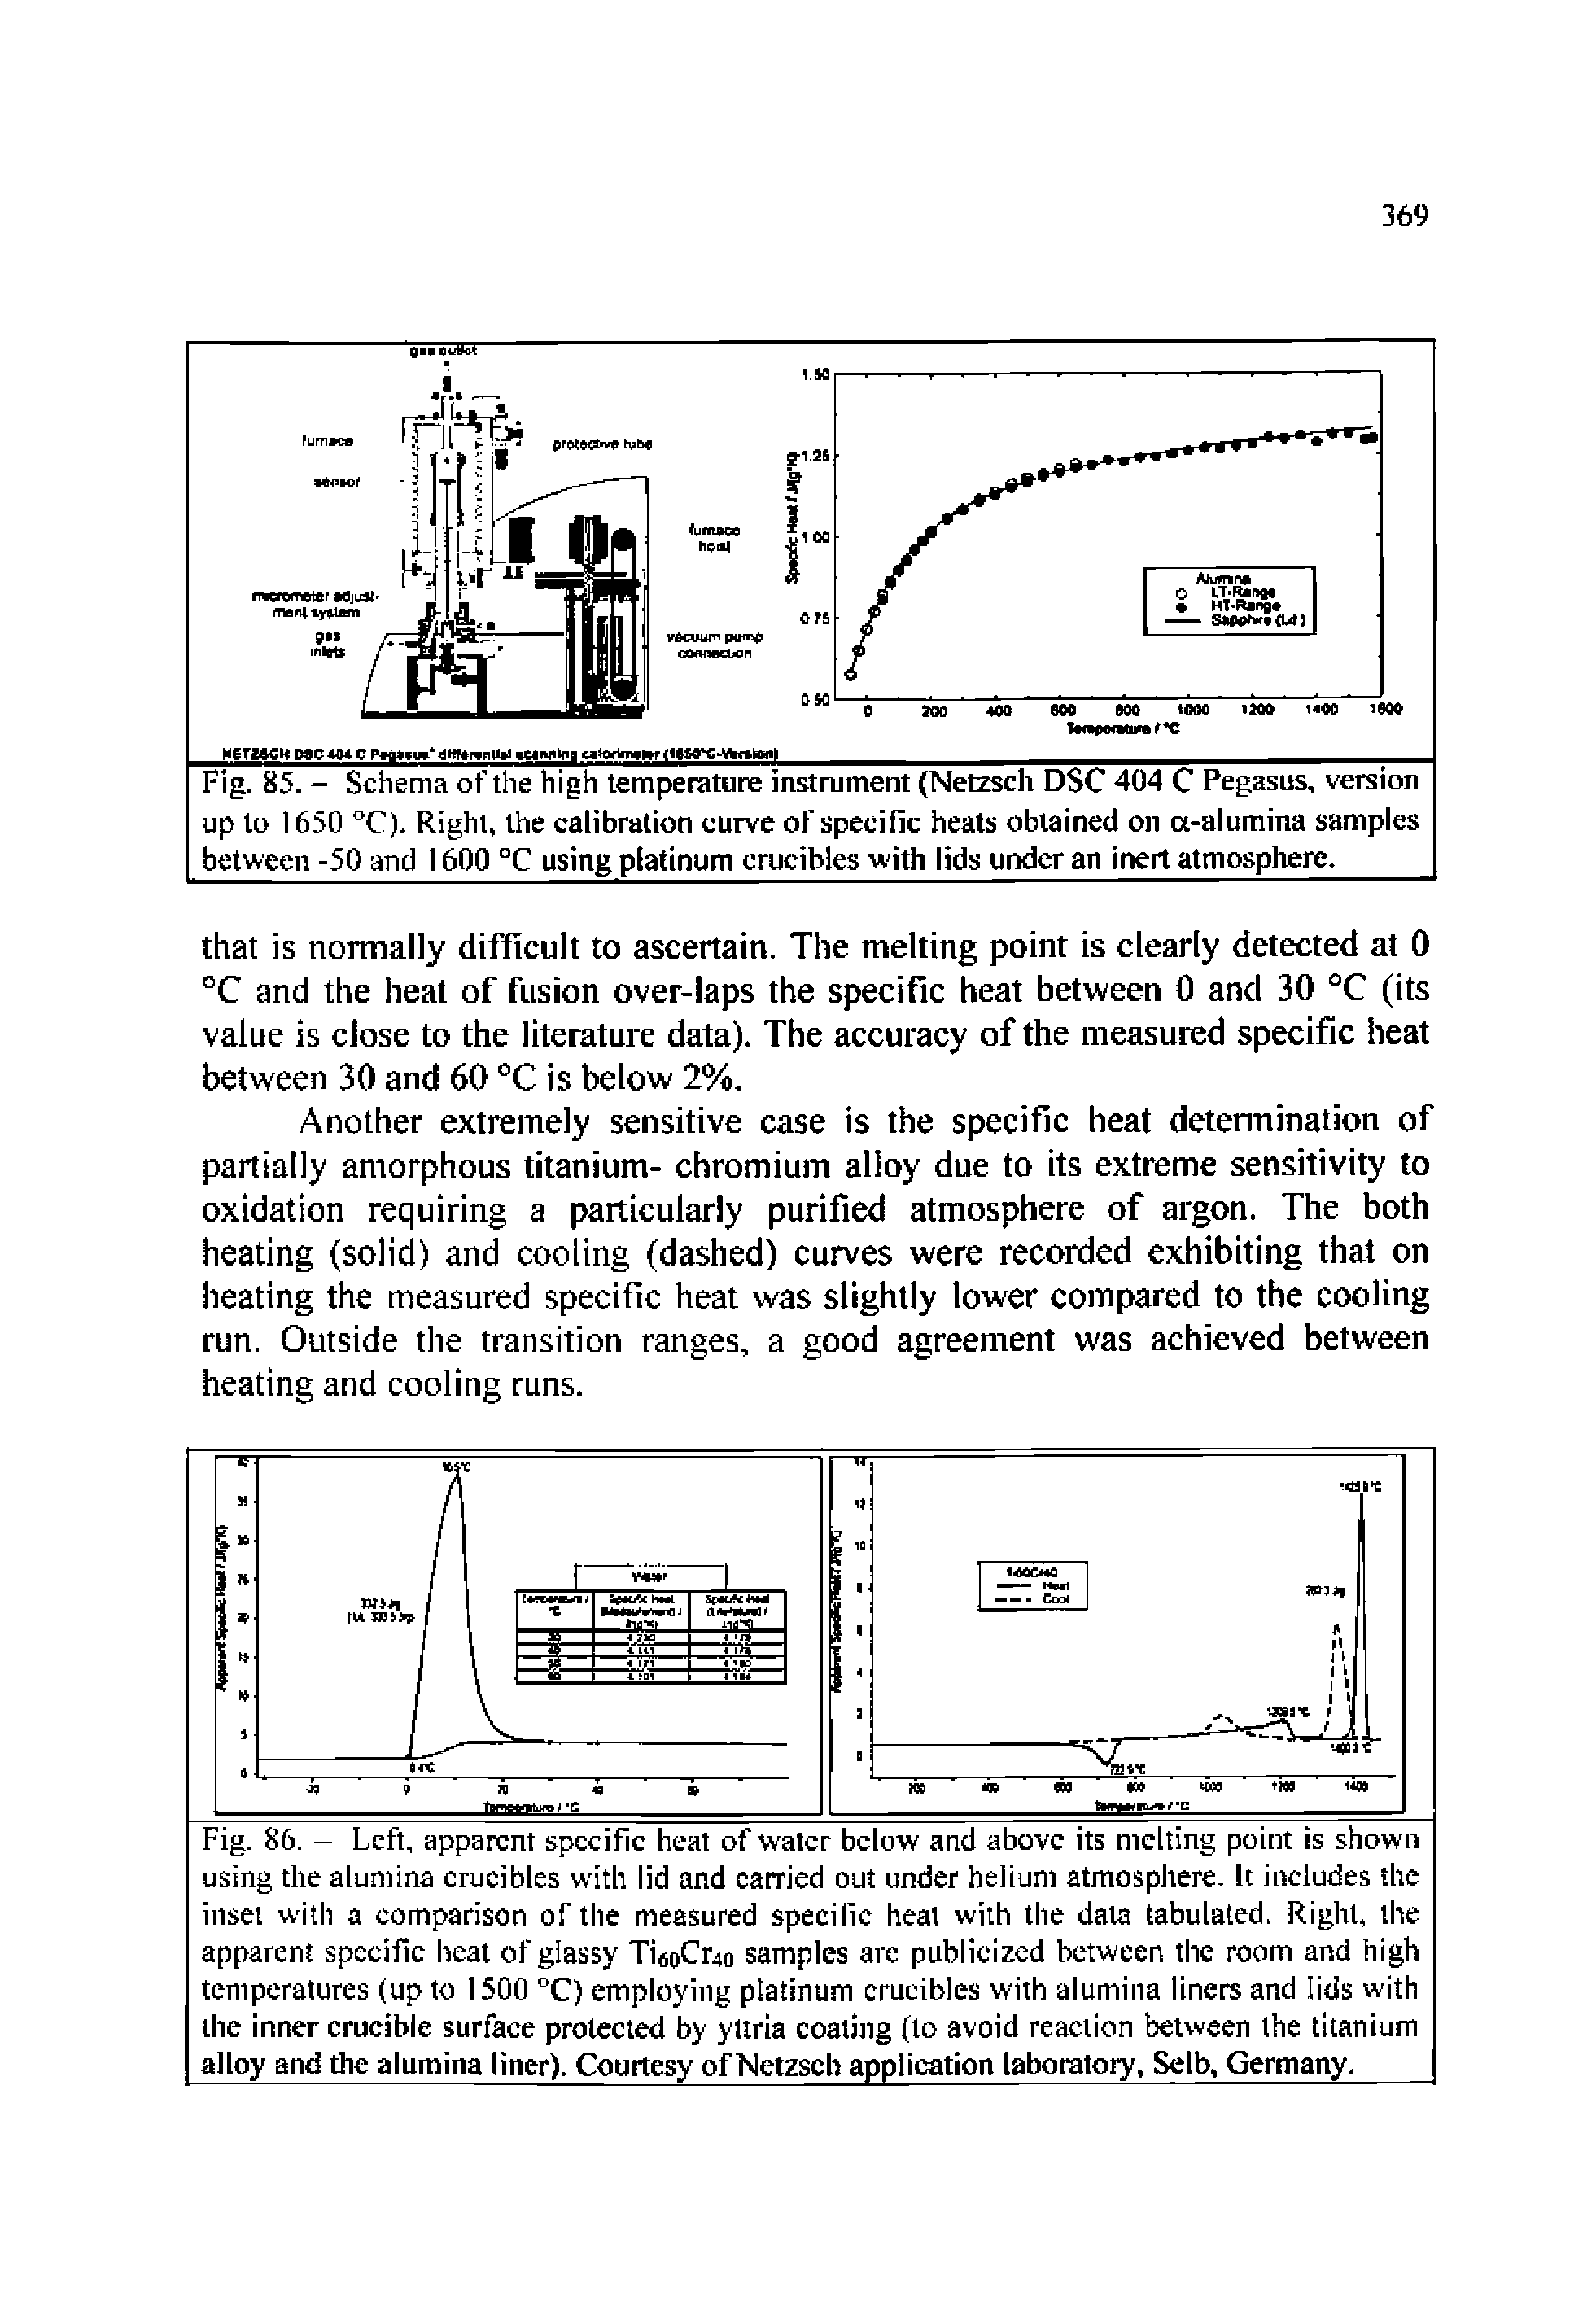 Fig. 85. - Schema of the high temperature instrument (Netzsch DSC 404 C Pegasus, version up to 1650 °C). Right, the calibration curve of specific heats obtained on a-alumina samples between -50 and 1600 °C using platinum crucibles with lids under an inert atmosphere.